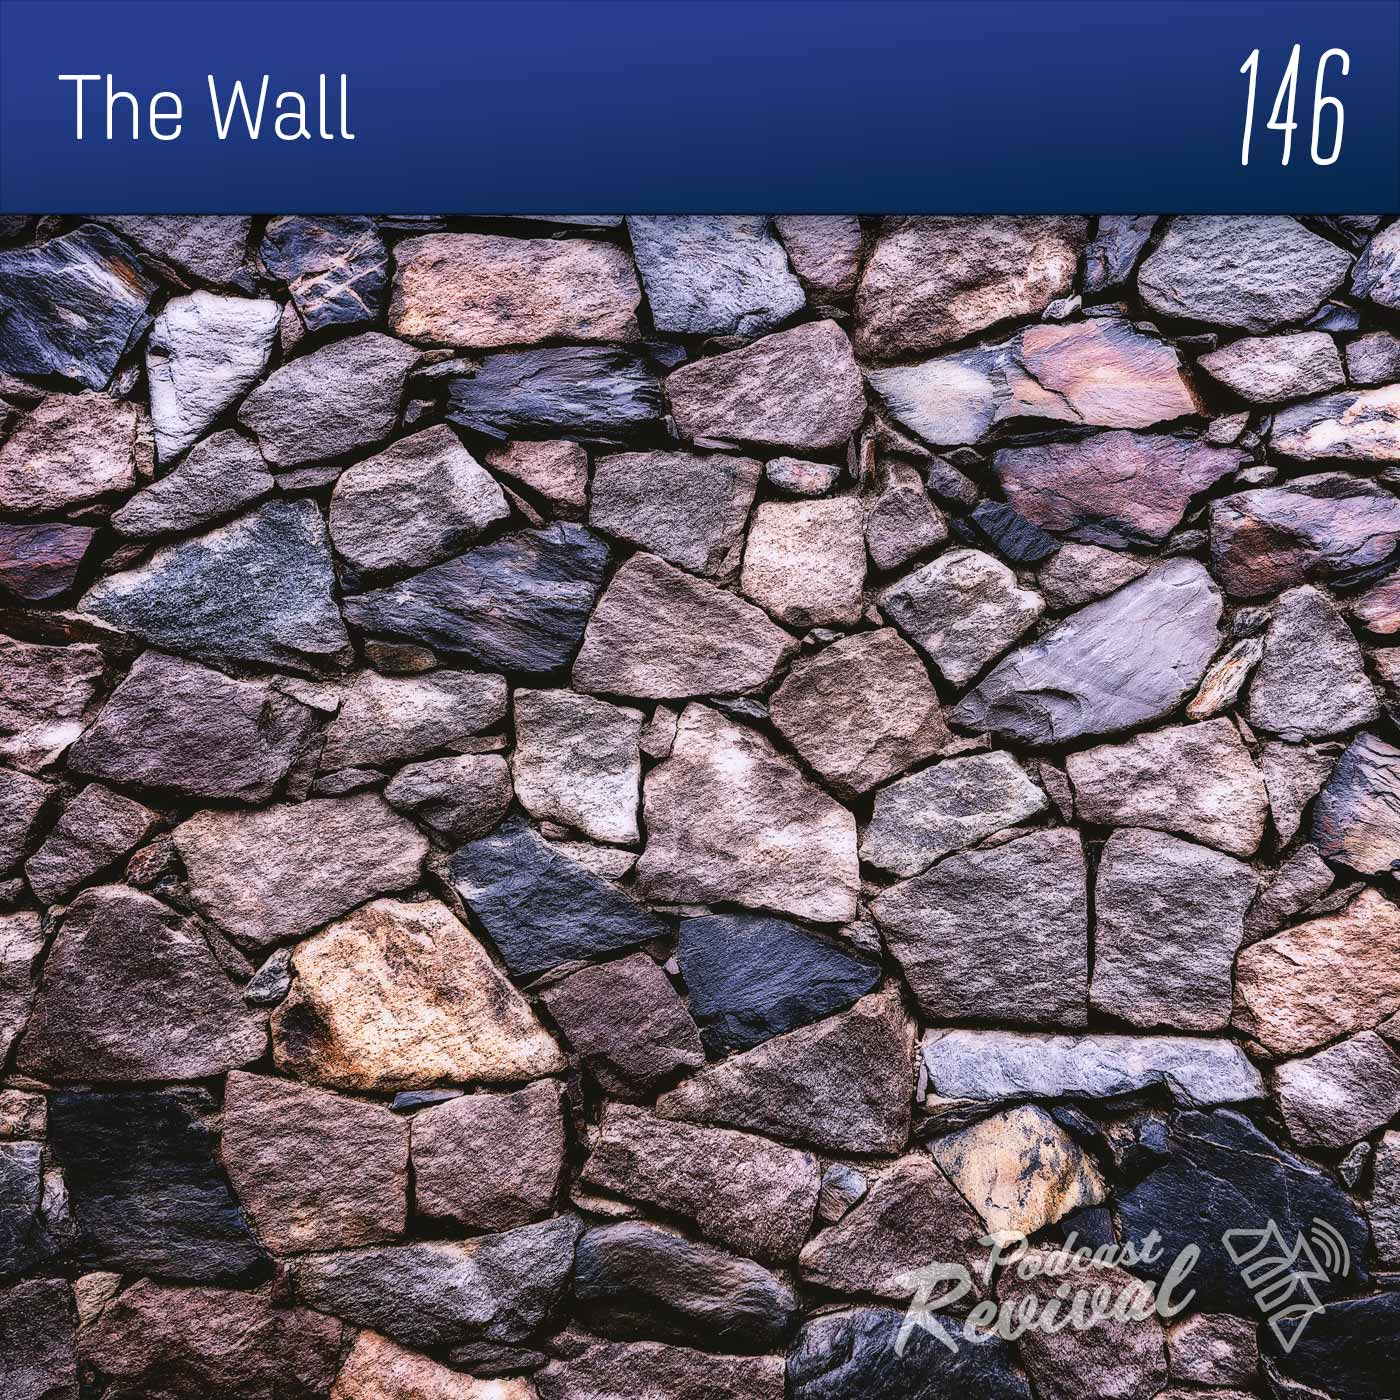 The Wall - Pr Mark Wattchow - 146